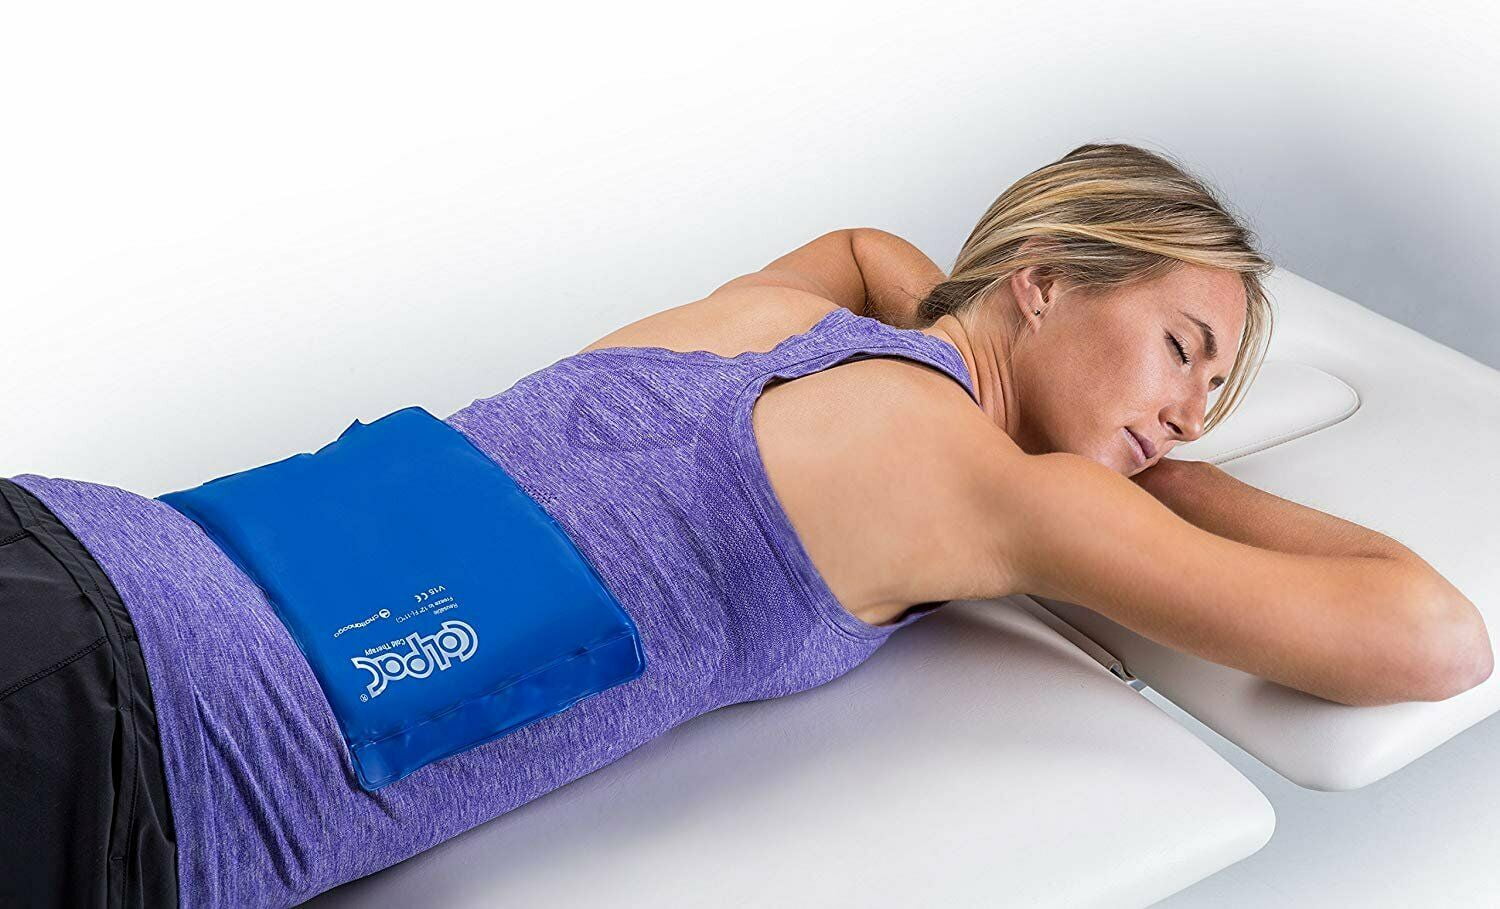 Chattanooga Colpac Oversize Large Ice Pack – Kin Care Medical Supply